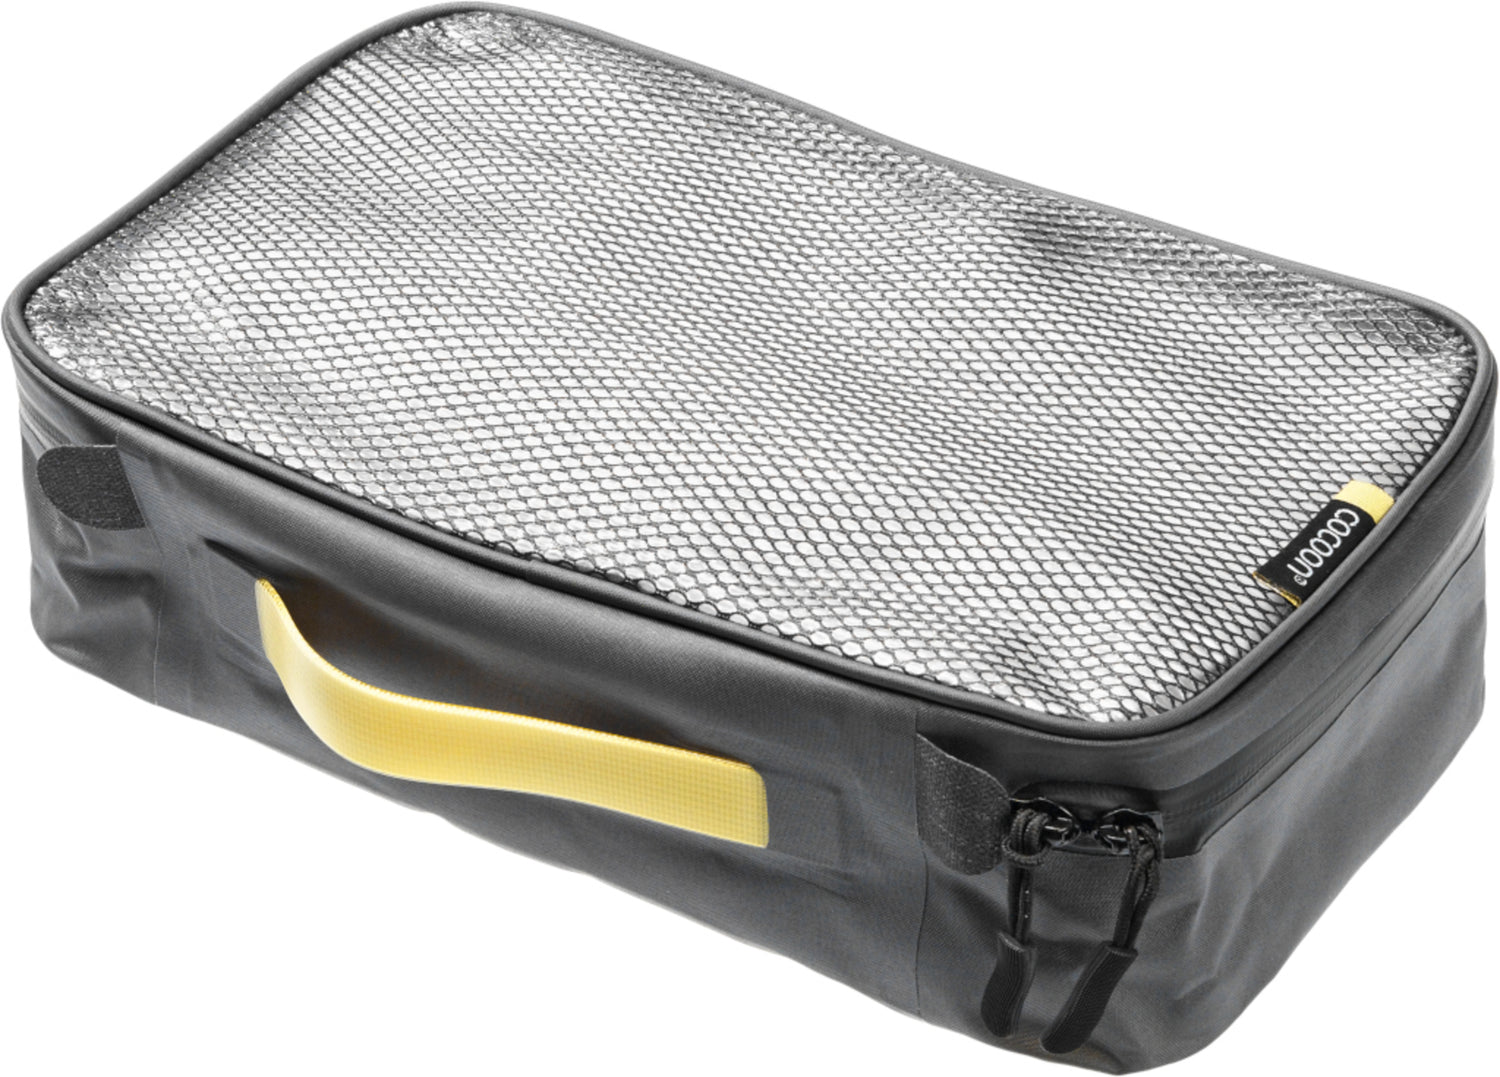 Cocoon Cocoon Packing Cube with Laminated Net Top M grey/yellow